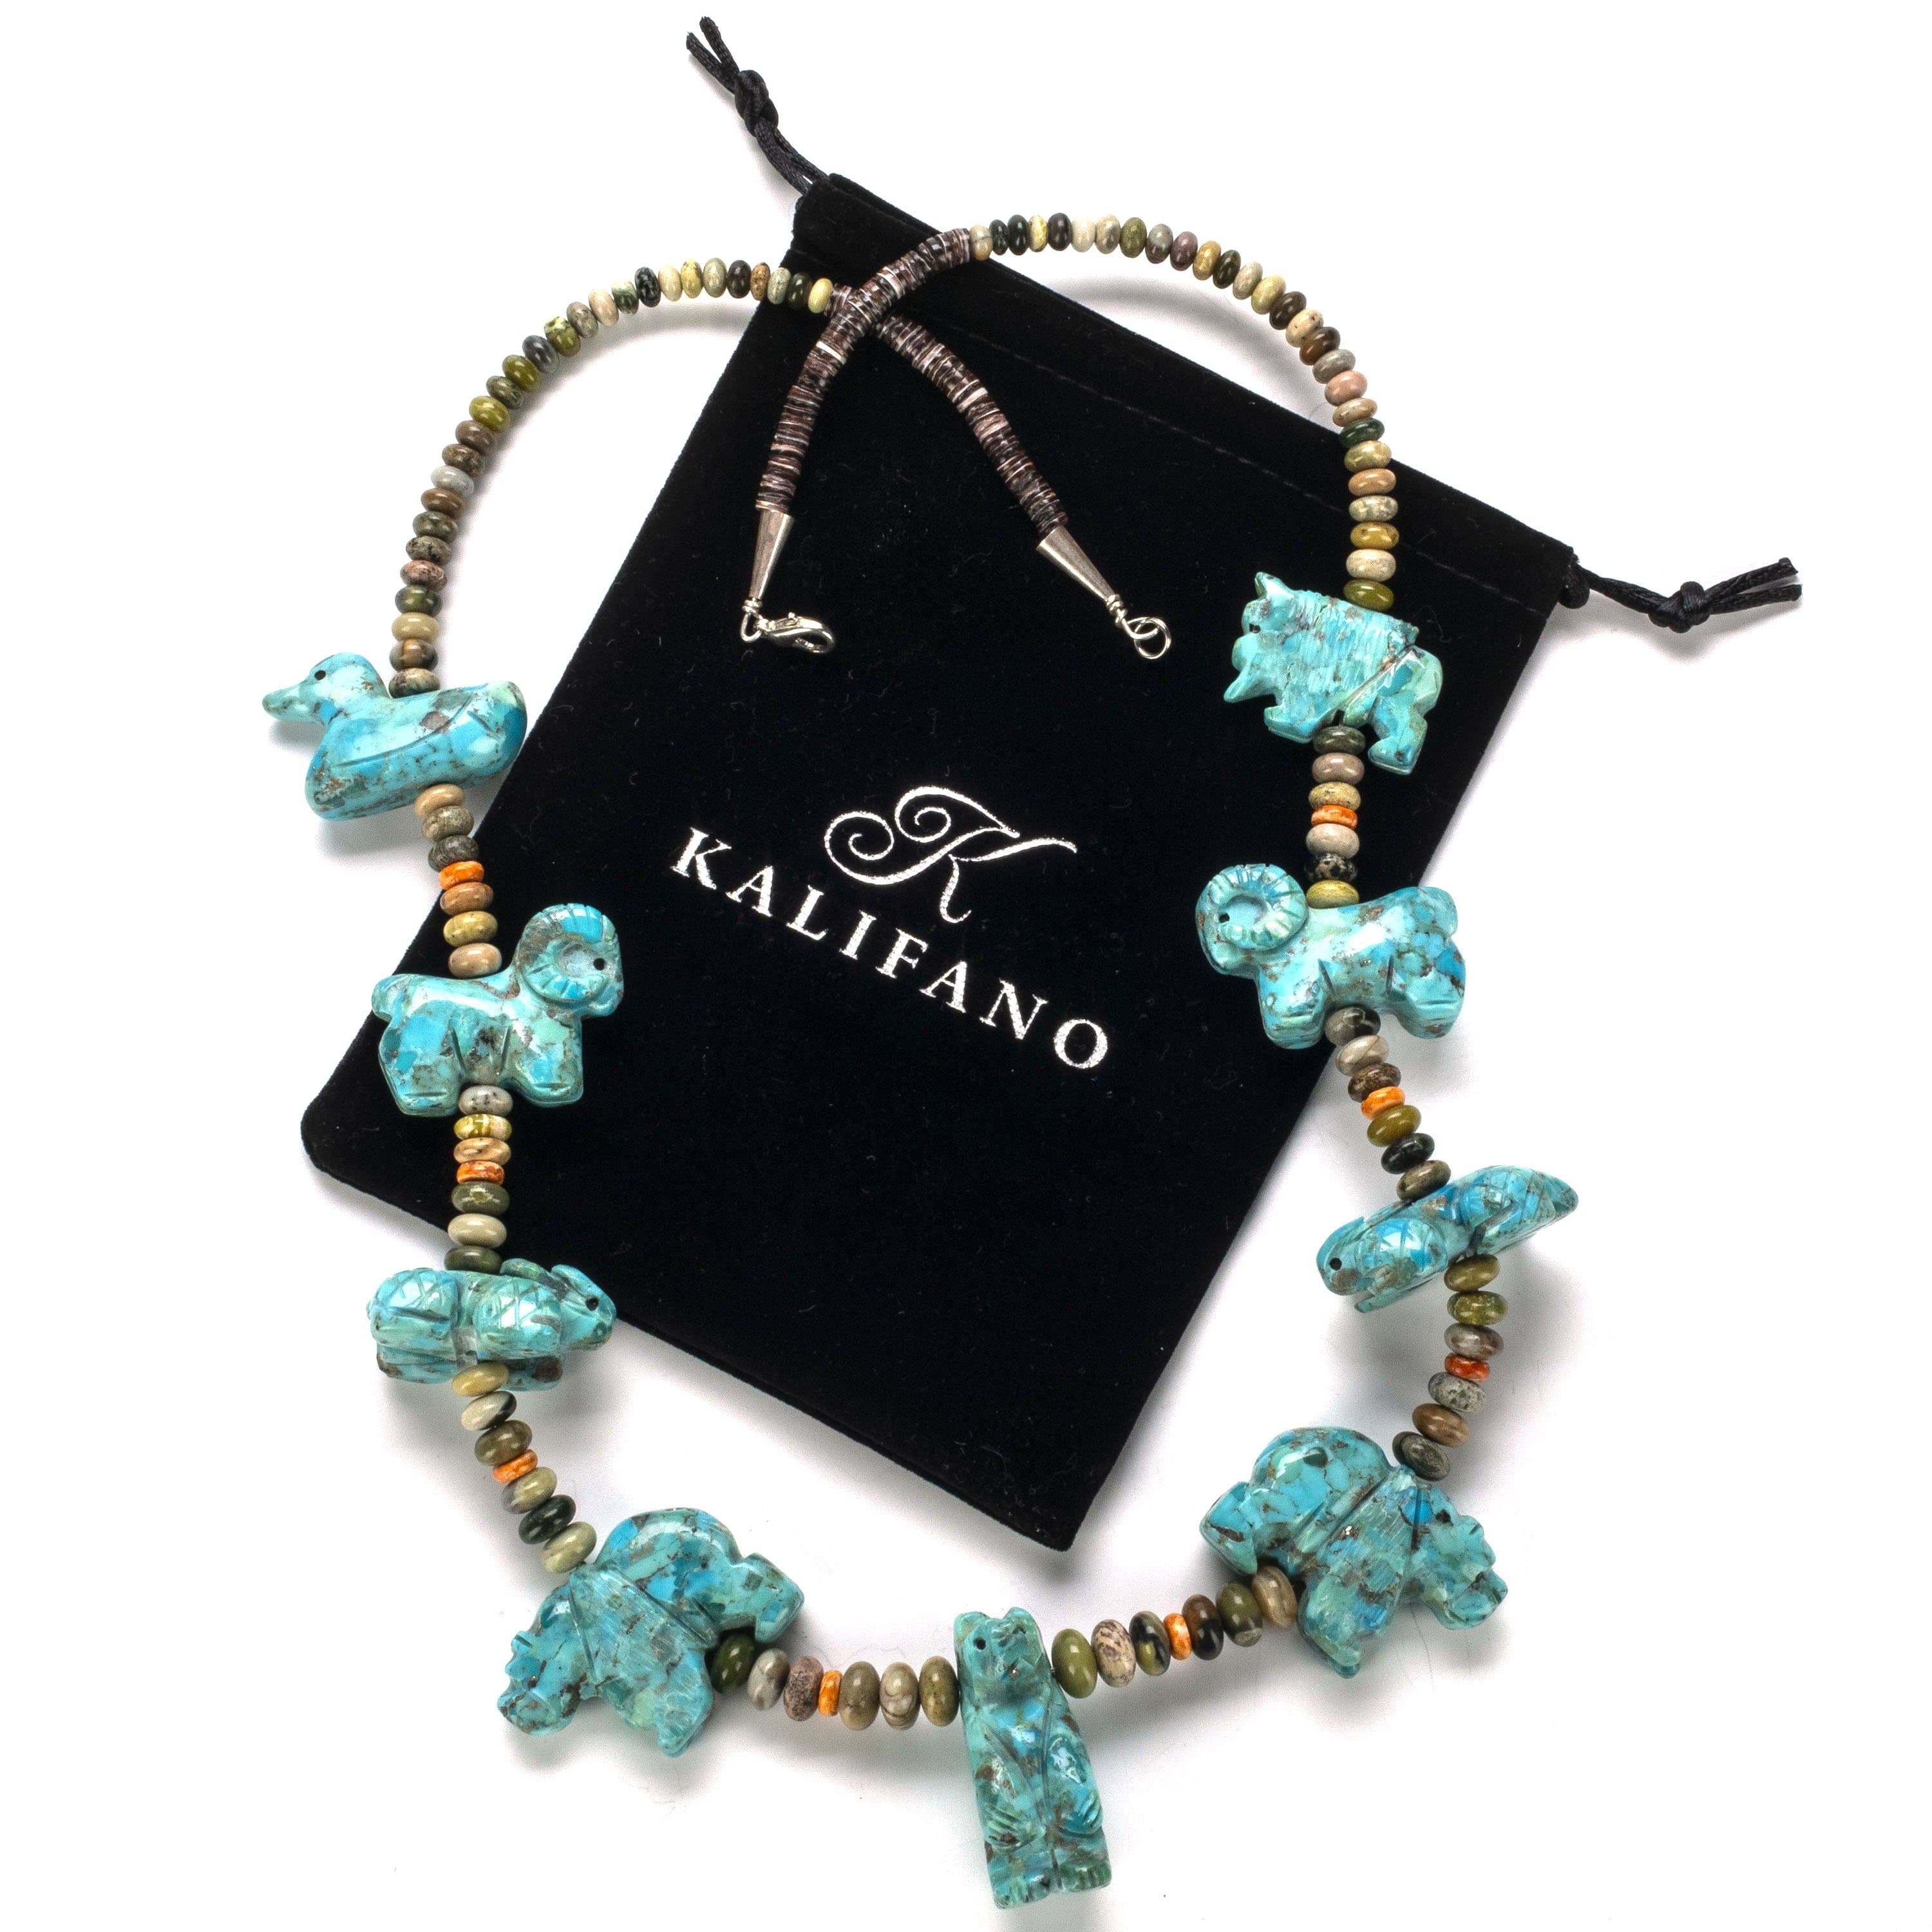 Kalifano Native American Jewelry Stacey Turpin Kingman Turquoise Fetish Carvings USA Native American Made 925 Sterling Silver Necklace NAN2100.001